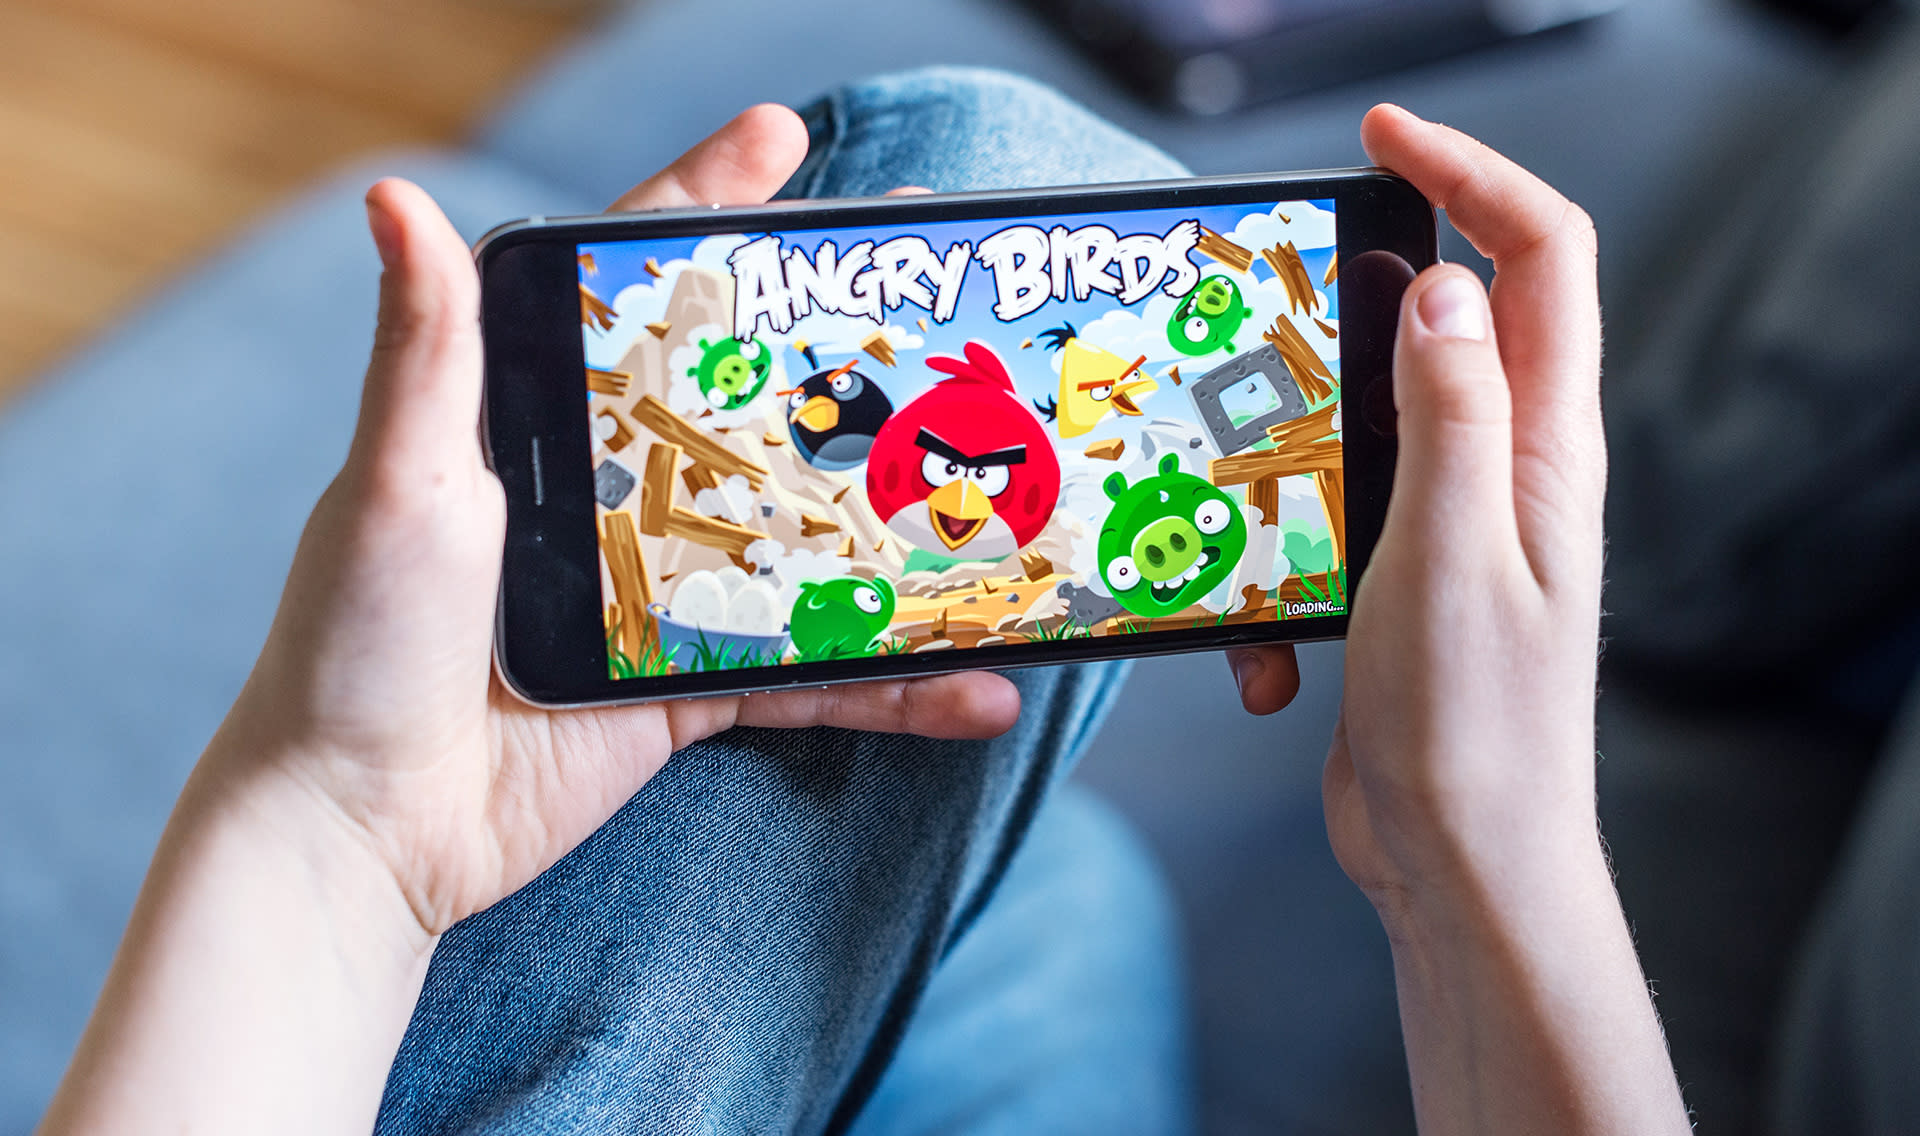 Angry Birds maker Rovio is considering a takeover offer